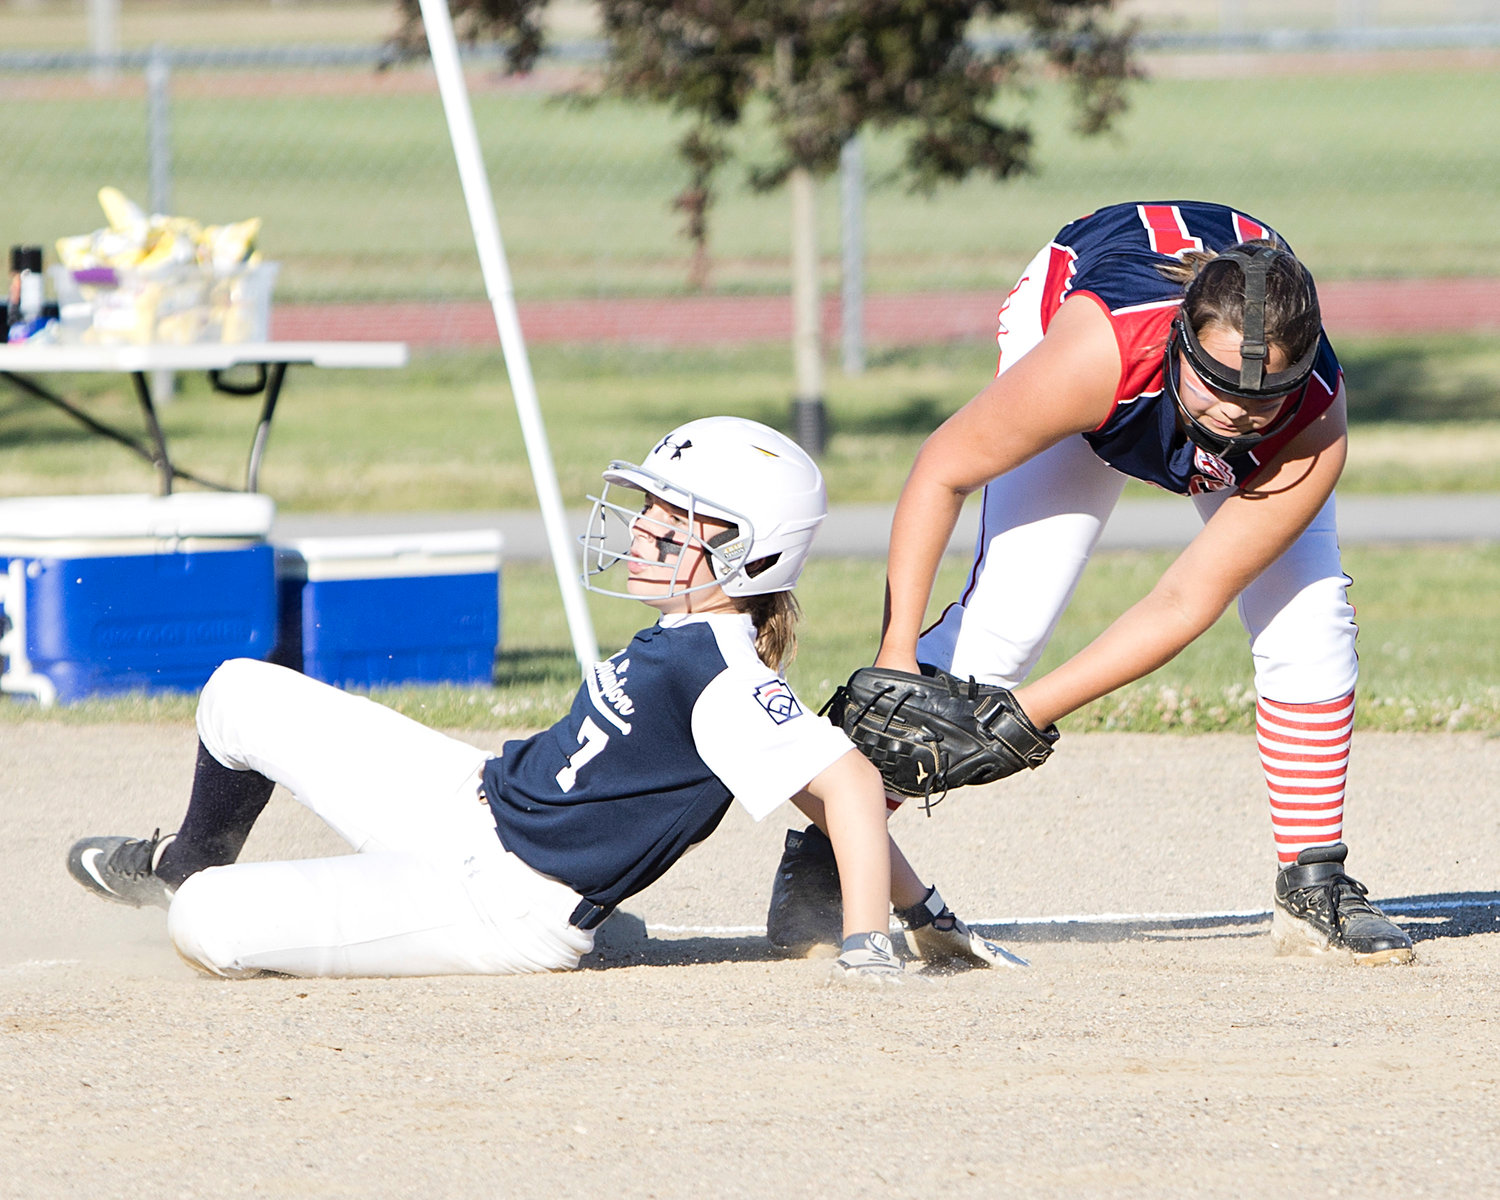 Audry Paxton is tagged by a Tiverton opponent as she slides into third base.